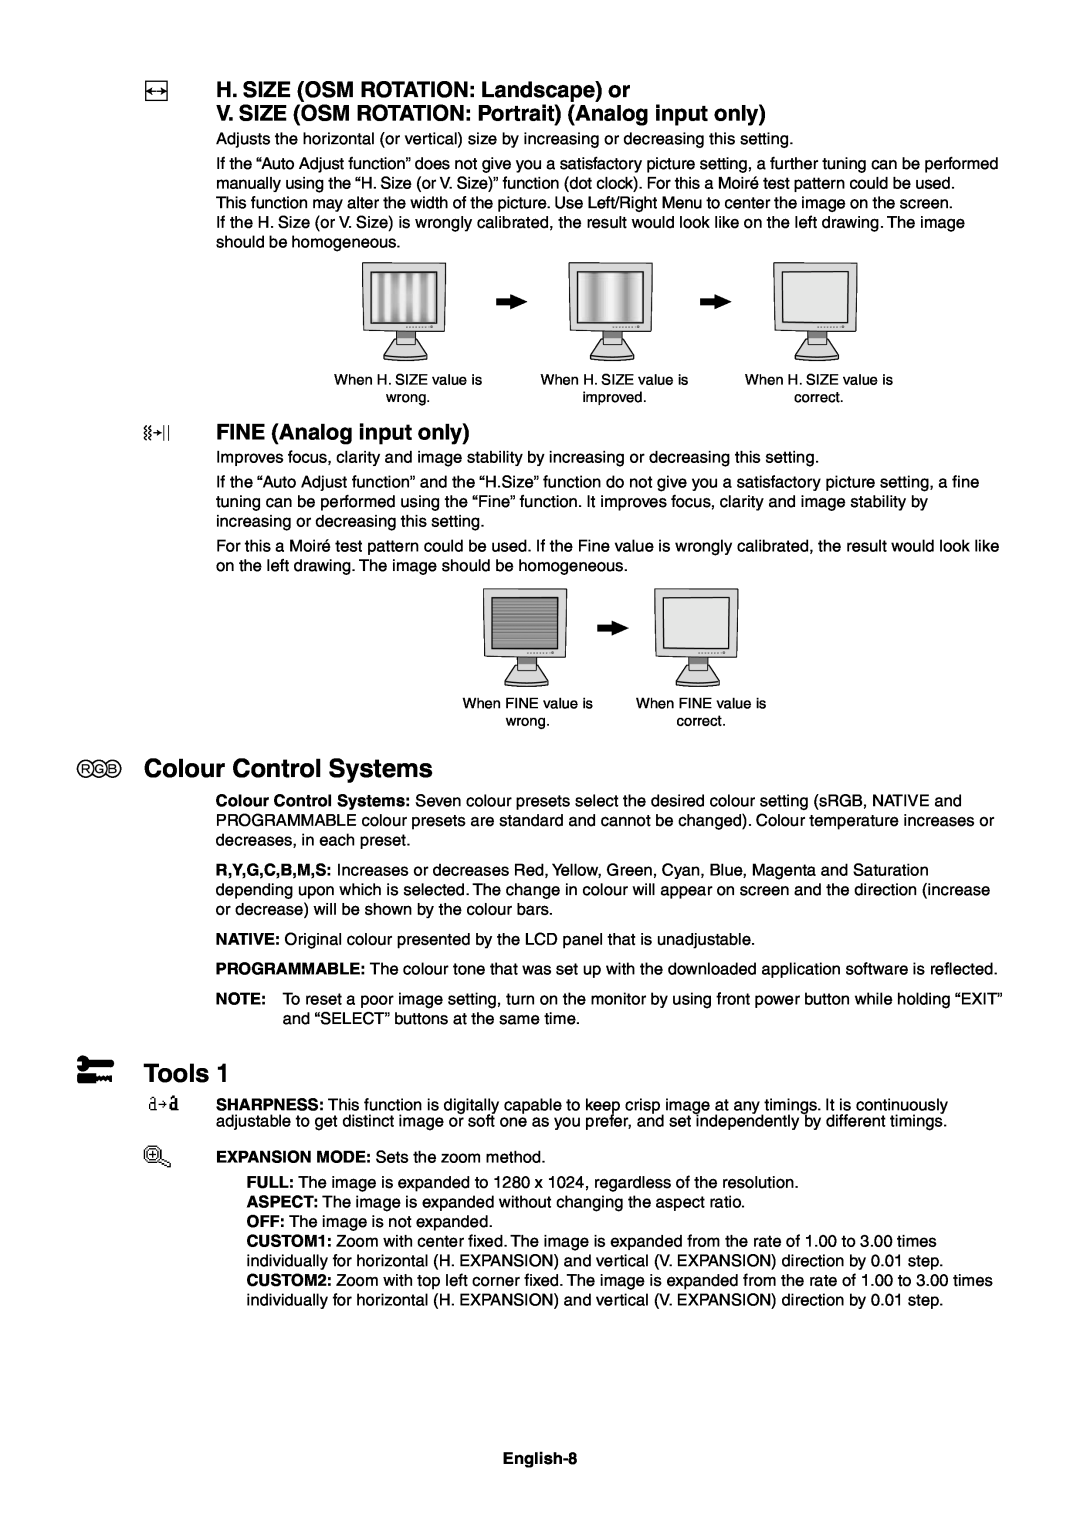 NEC 1980FXi user manual Colour Control Systems, Tools, H. SIZE OSM ROTATION Landscape or, FINE Analog input only, English-8 